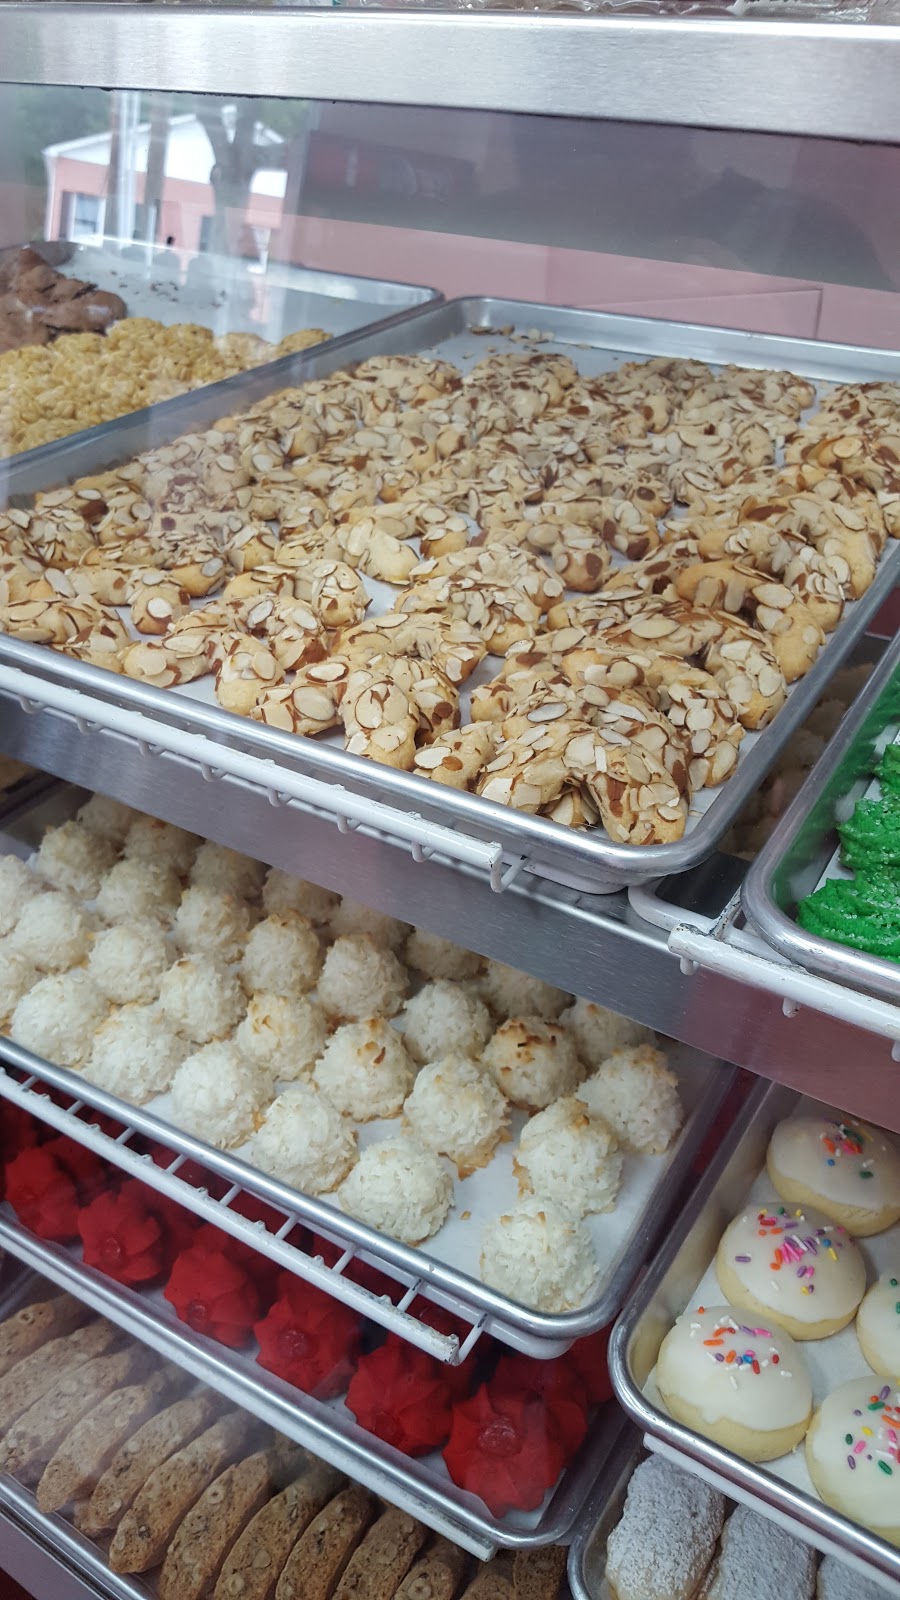 Angelos Bakery | 32 Halls Hill Rd, Colchester, CT 06415 | Phone: (860) 537-2272